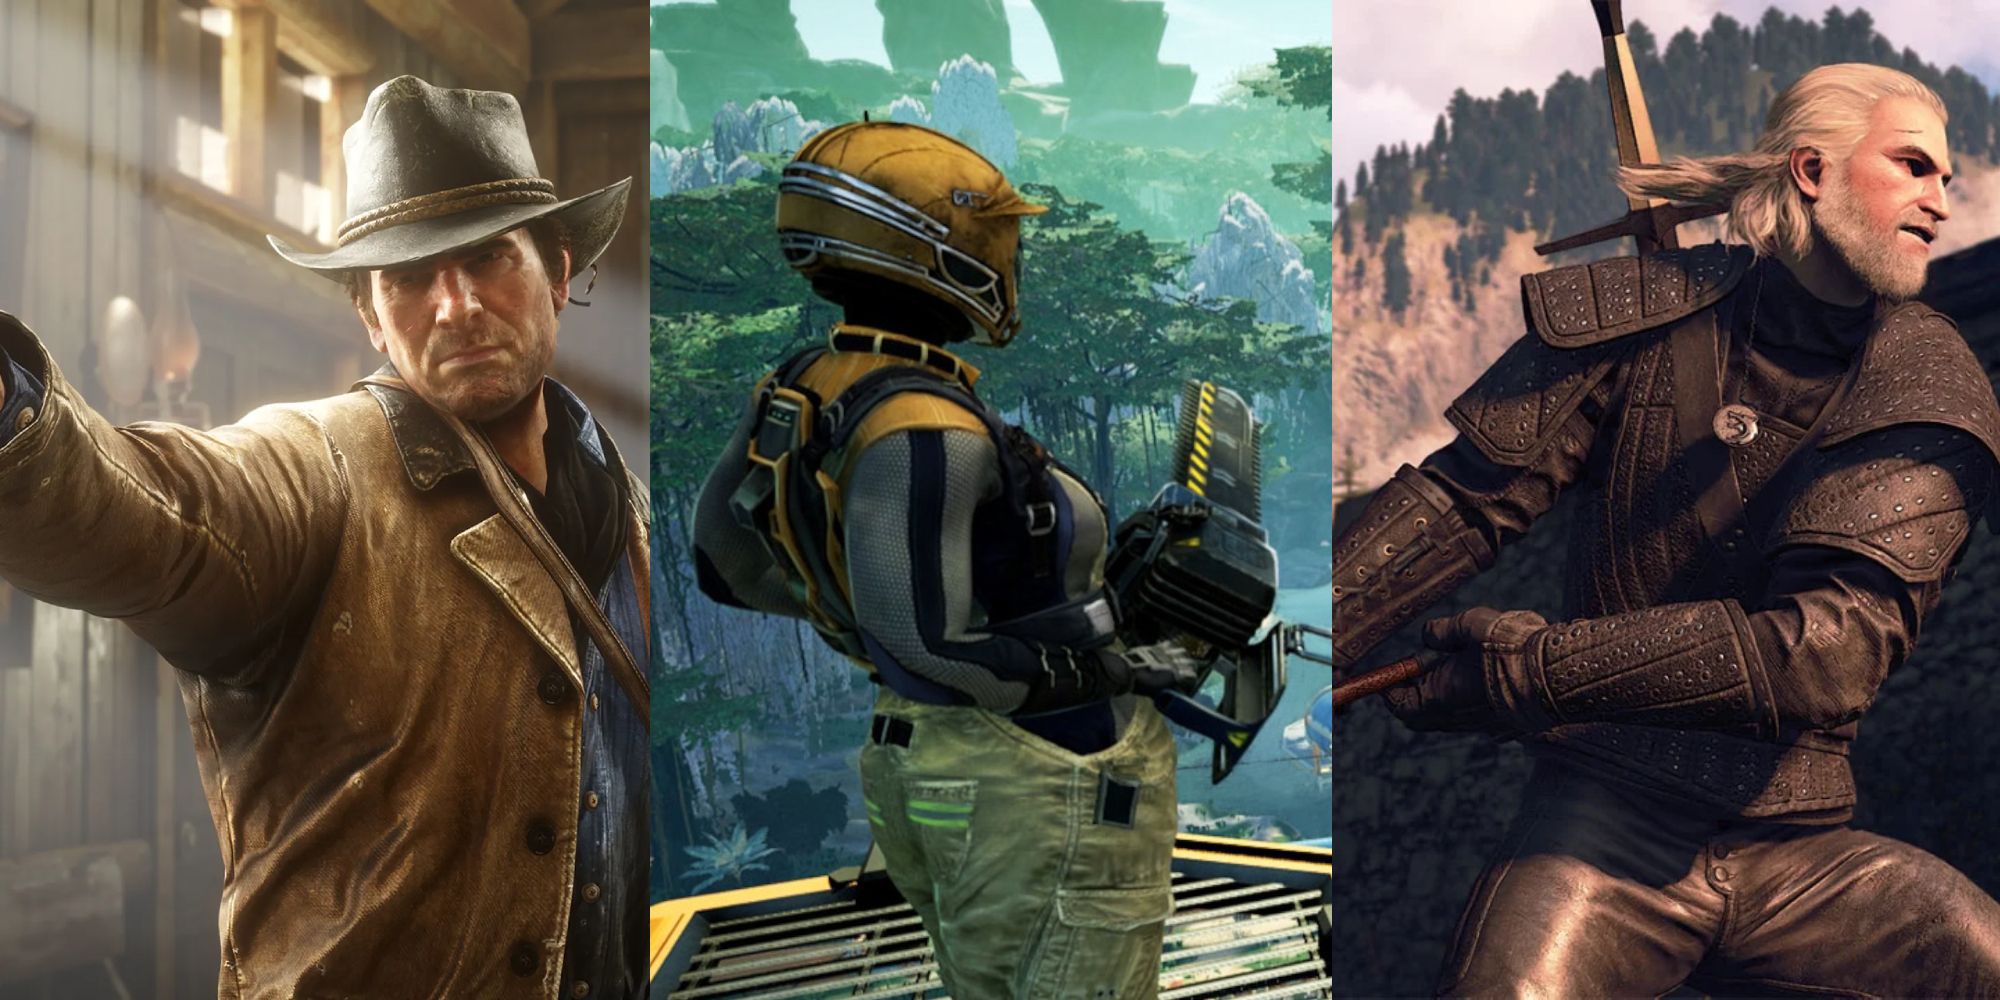 Split image: Arthur Morgan from Red Dead Redemption 2 aiming his gun, an astronaut from Satisfactory overlooking a factory, and Geralt from the Witcher 3, with his sword in a combat stance.